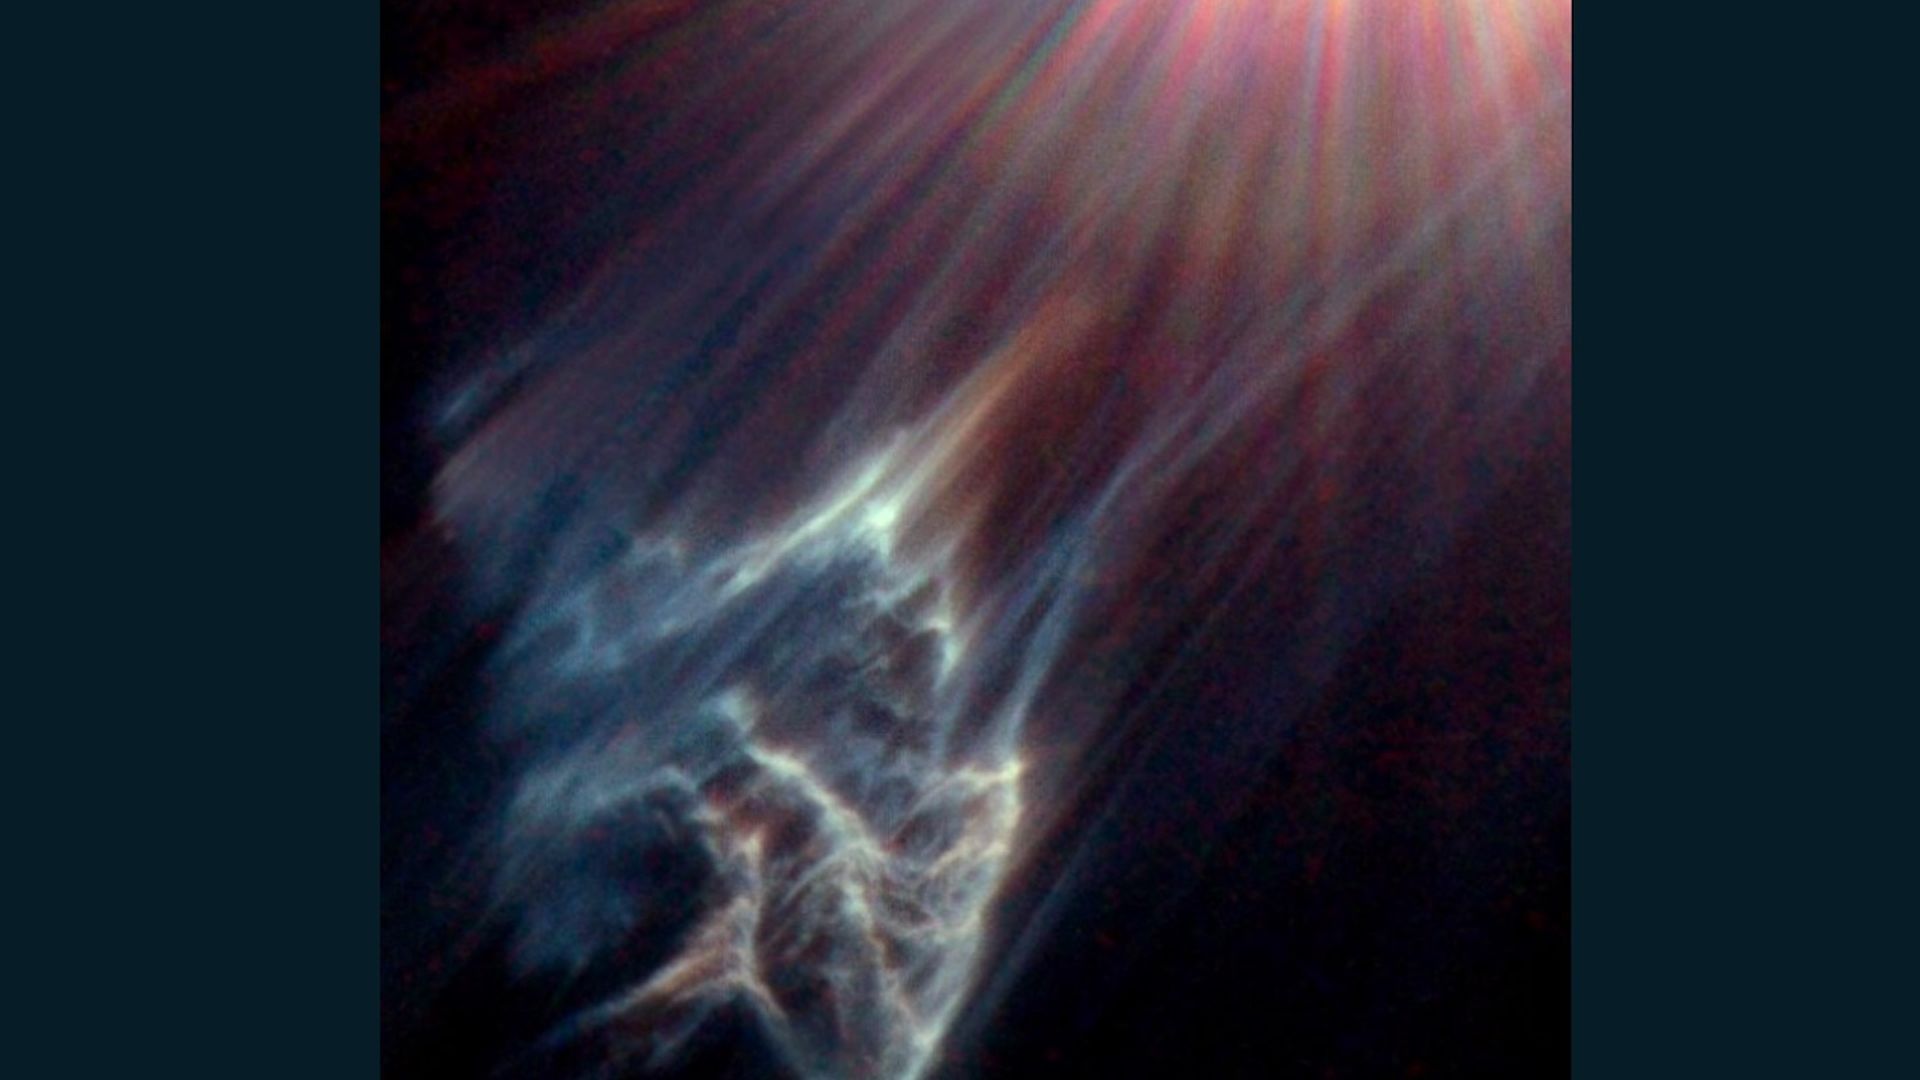 The wisps of an interstellar cloud being ripped apart by a star